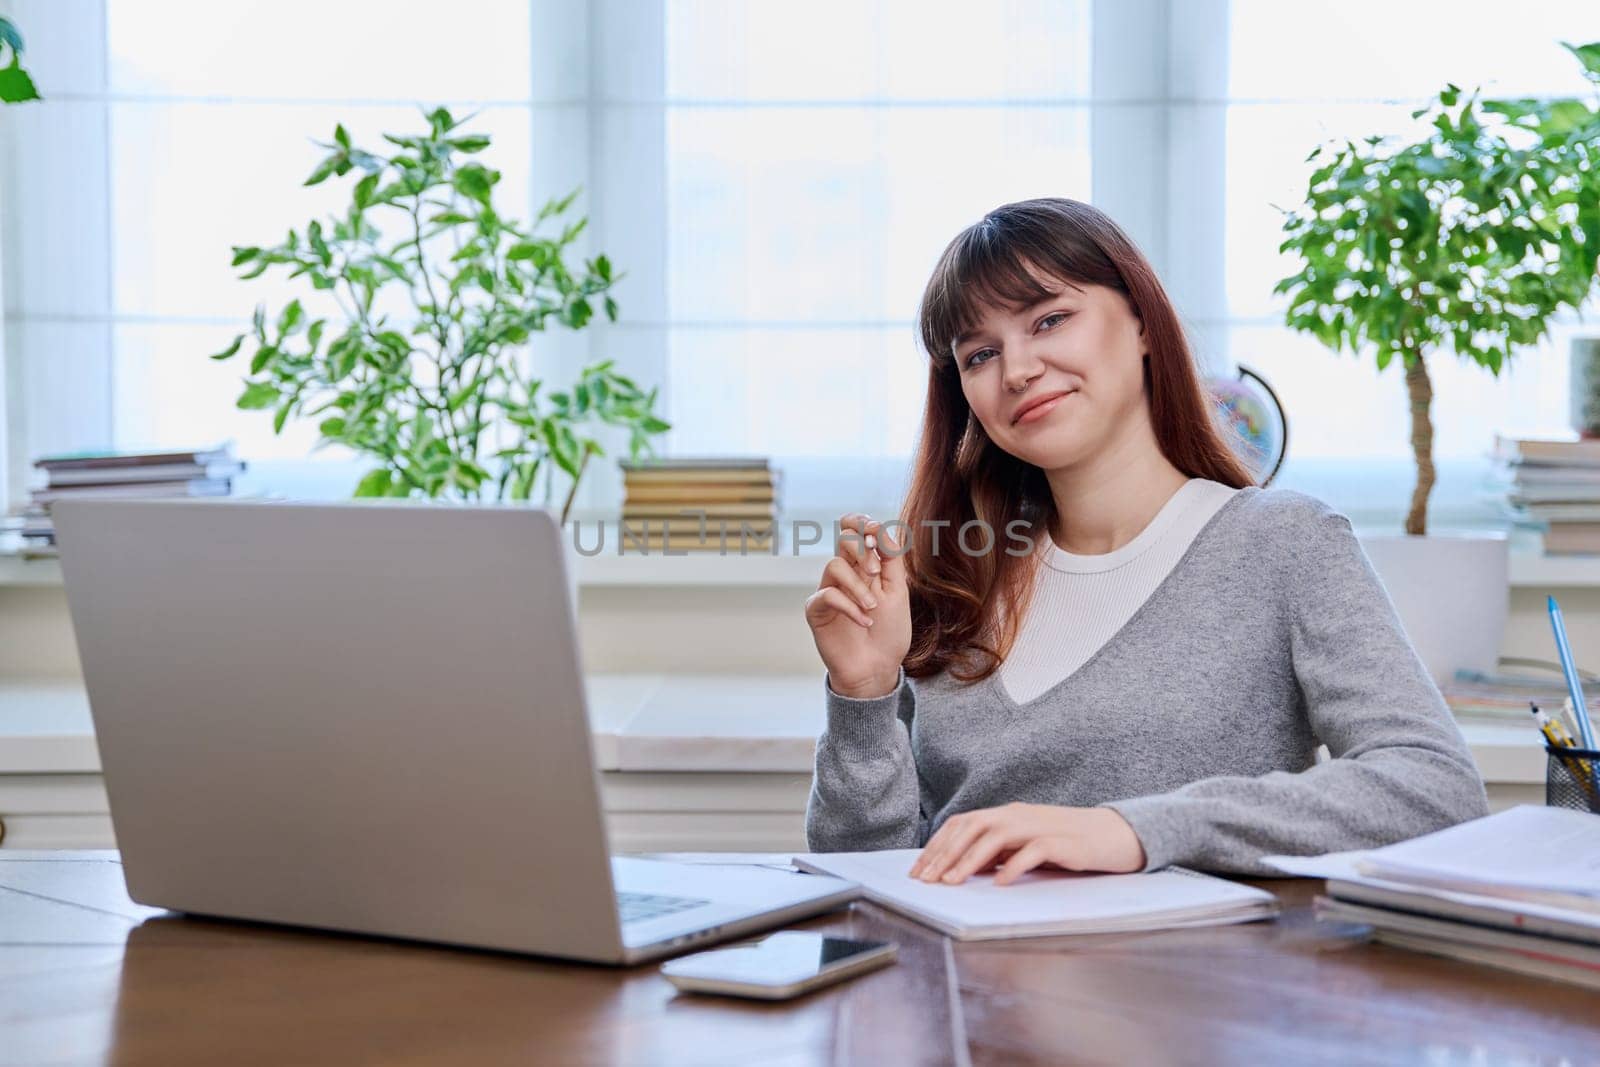 Young female college student studying at home at desk using computer laptop, writing in notebook, smiling looking at camera. E-learning, education, technology, knowledge, youth concept